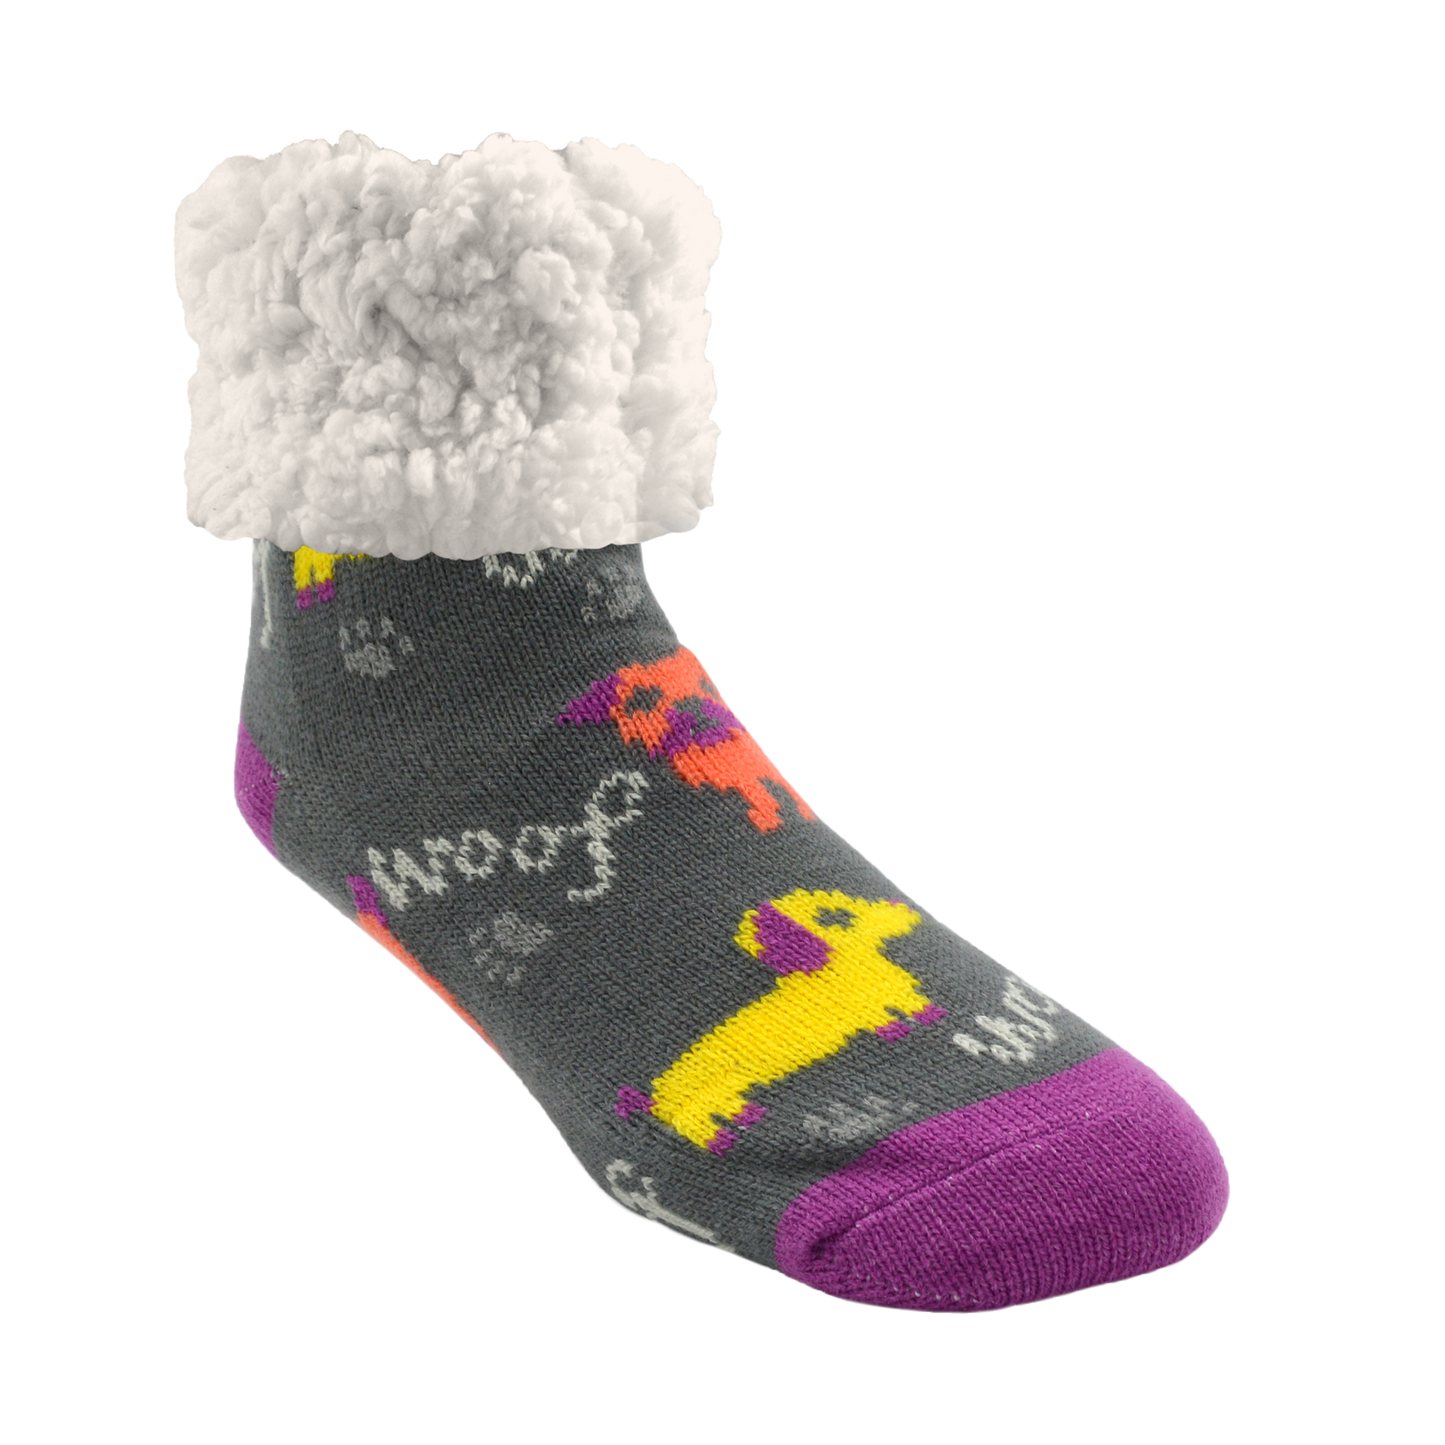 Pudus Cozy Winter Slipper Socks for Women and Men with Non-Slip Grippers and Faux Fur Sherpa Fleece - Adult Regular Fuzzy Socks Dog Woof - Classic Slipper Sock